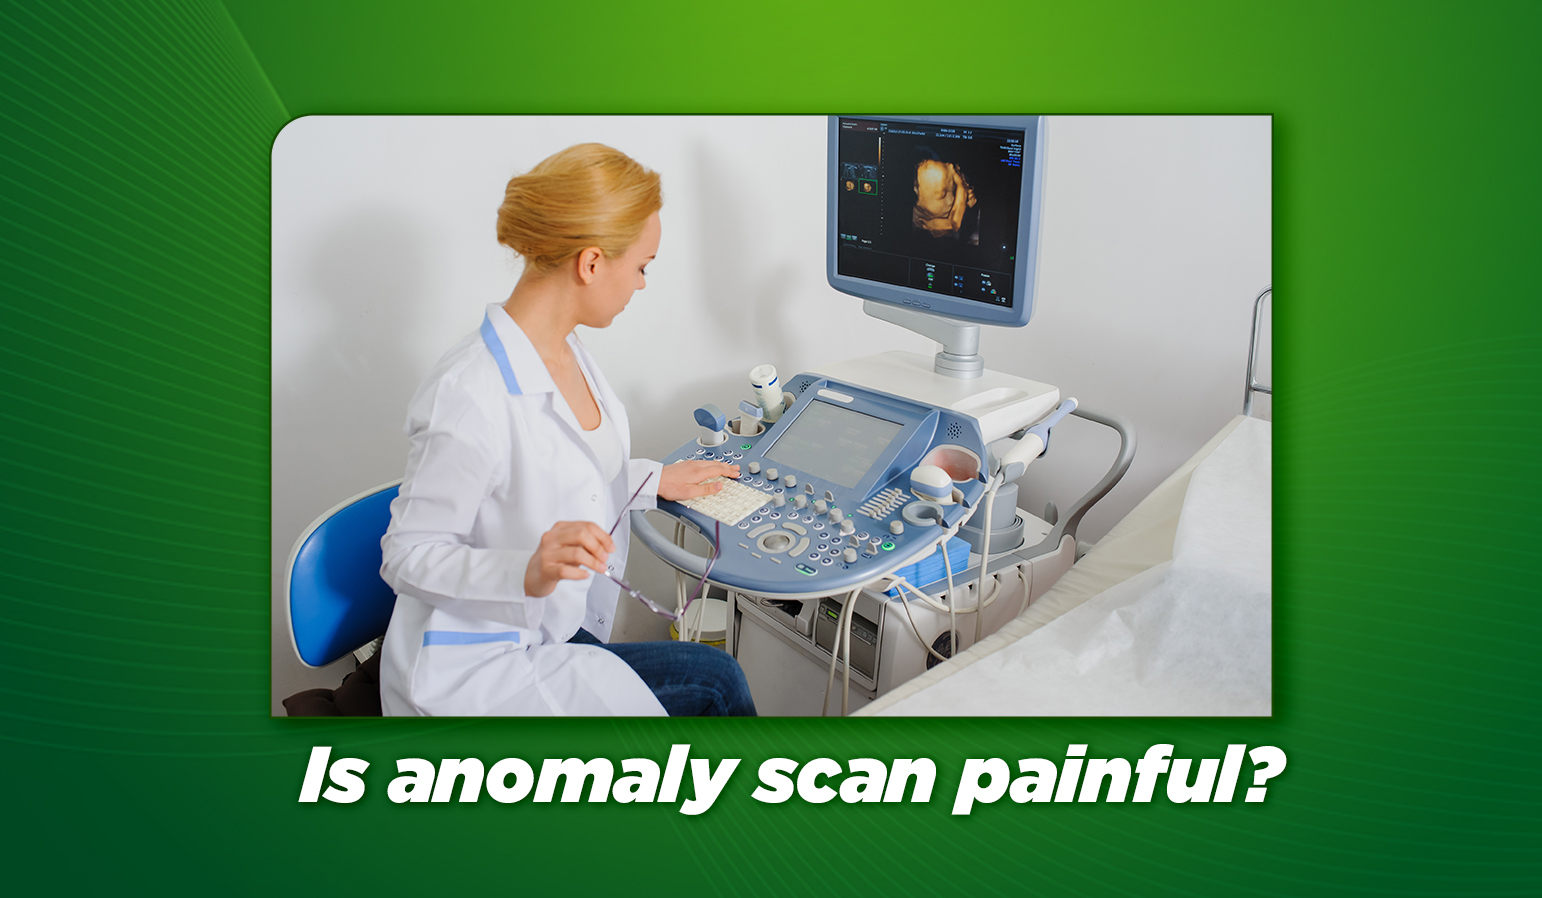 is anomaly scan painful